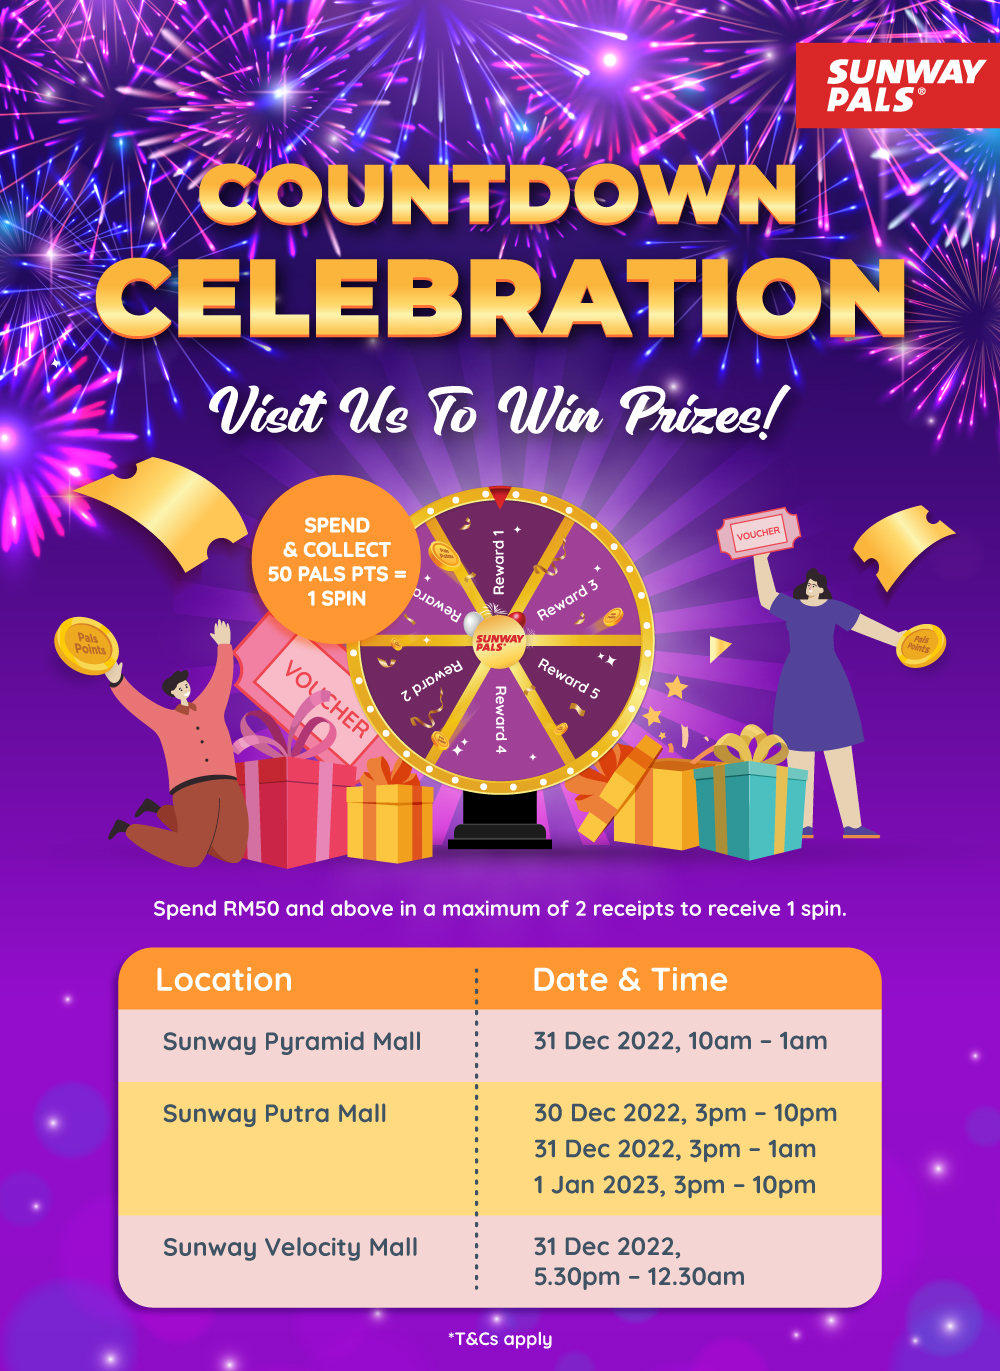 With the New Year right around the corner, make sure you’re ready to countdown with us at Sunway Malls & stand a chance to win a gift just by spinning our wheel!  We have free gifts, amazing gift redemption's and much more!